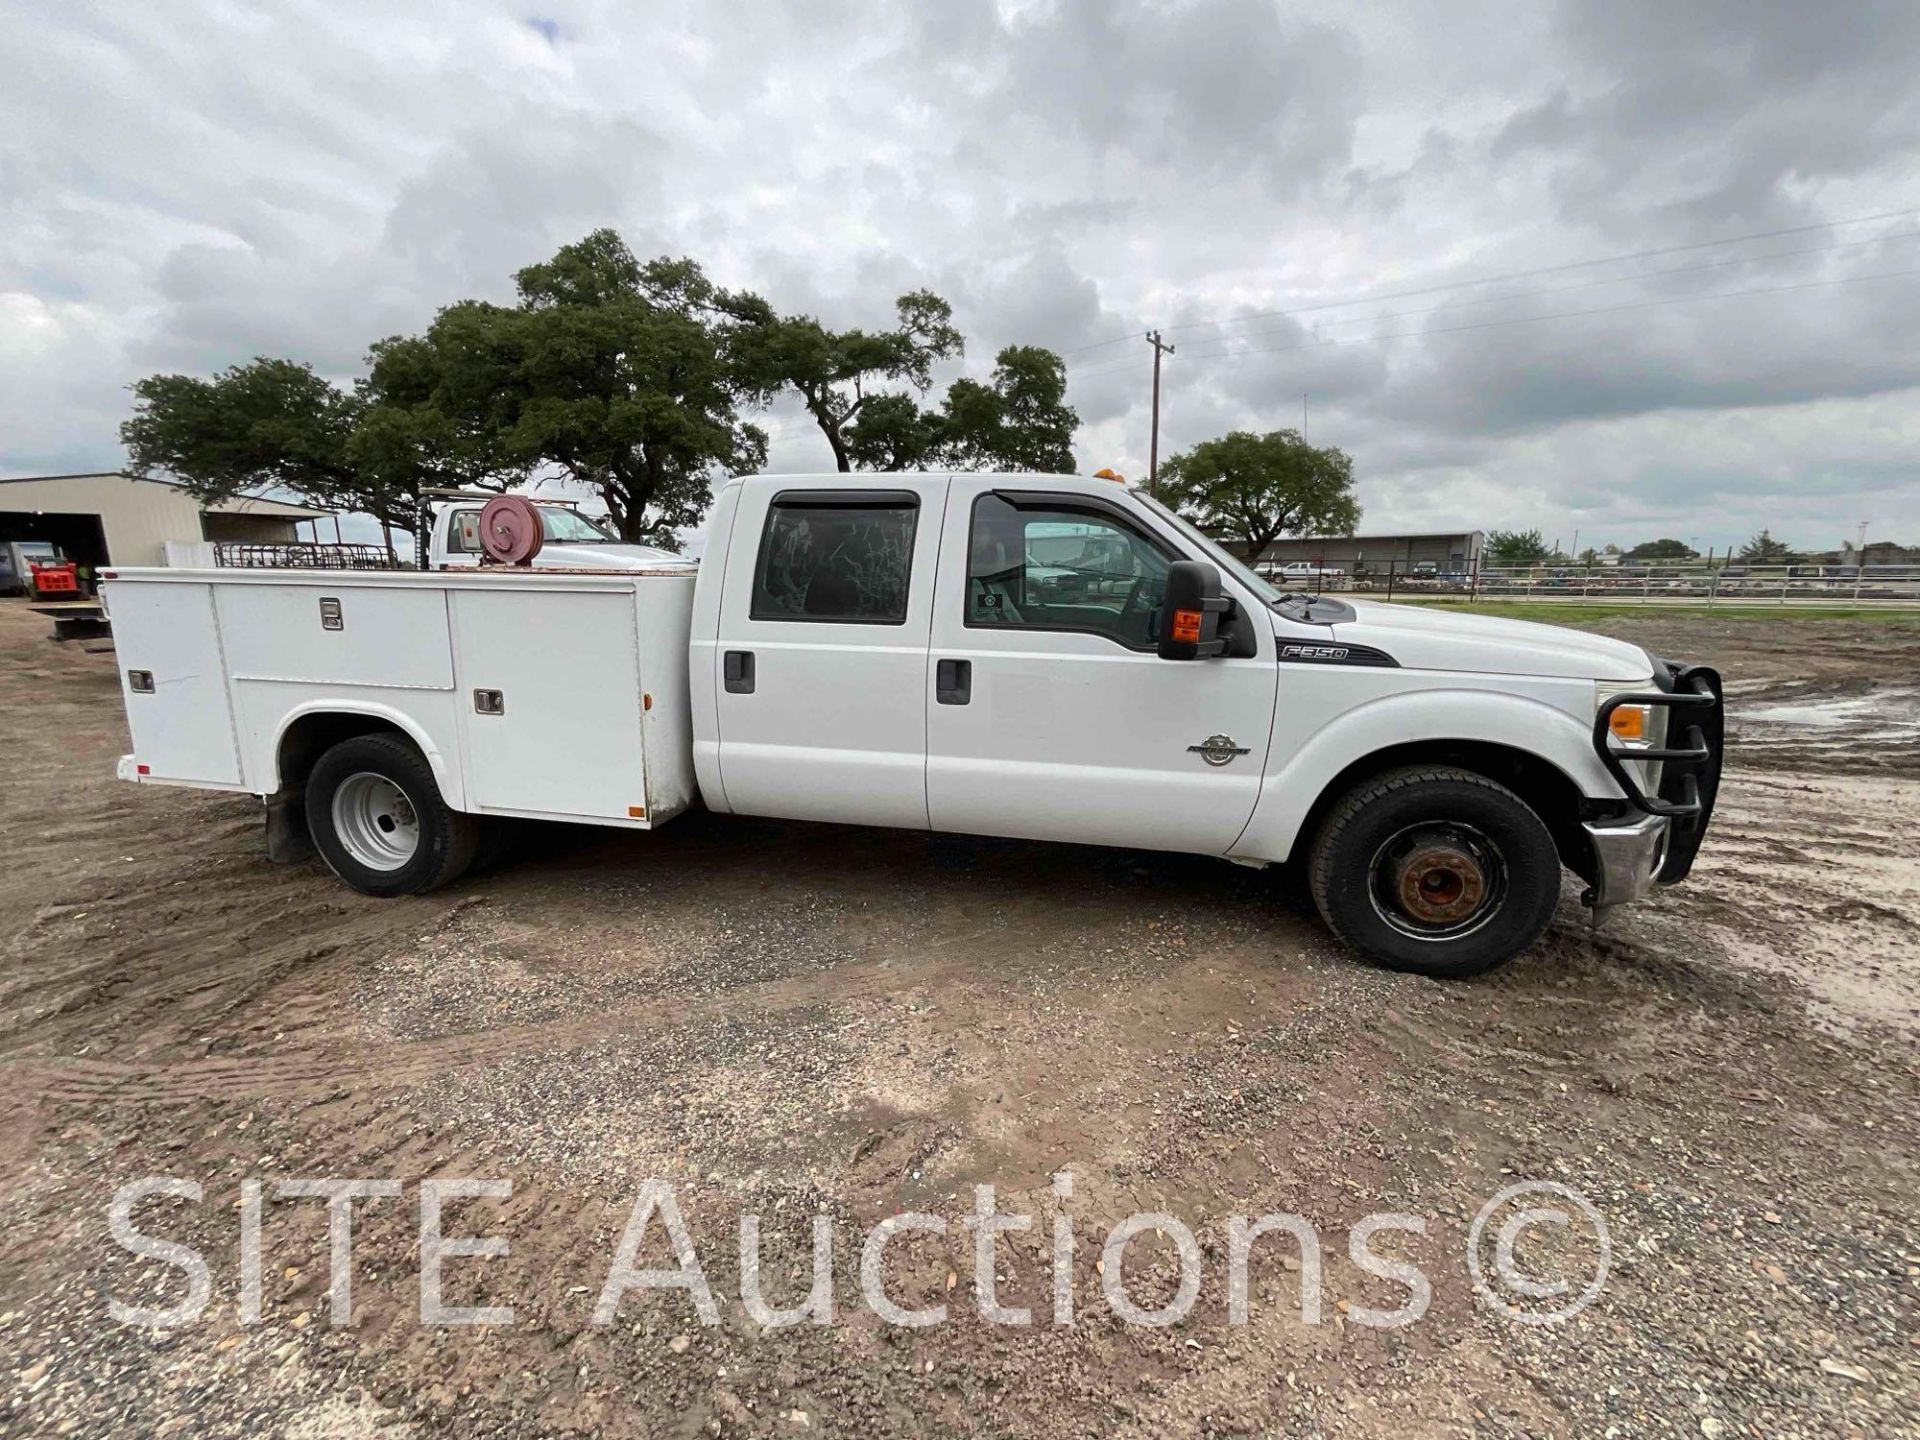 2013 Ford F350 SD Crew Cab Service Truck - Image 4 of 22